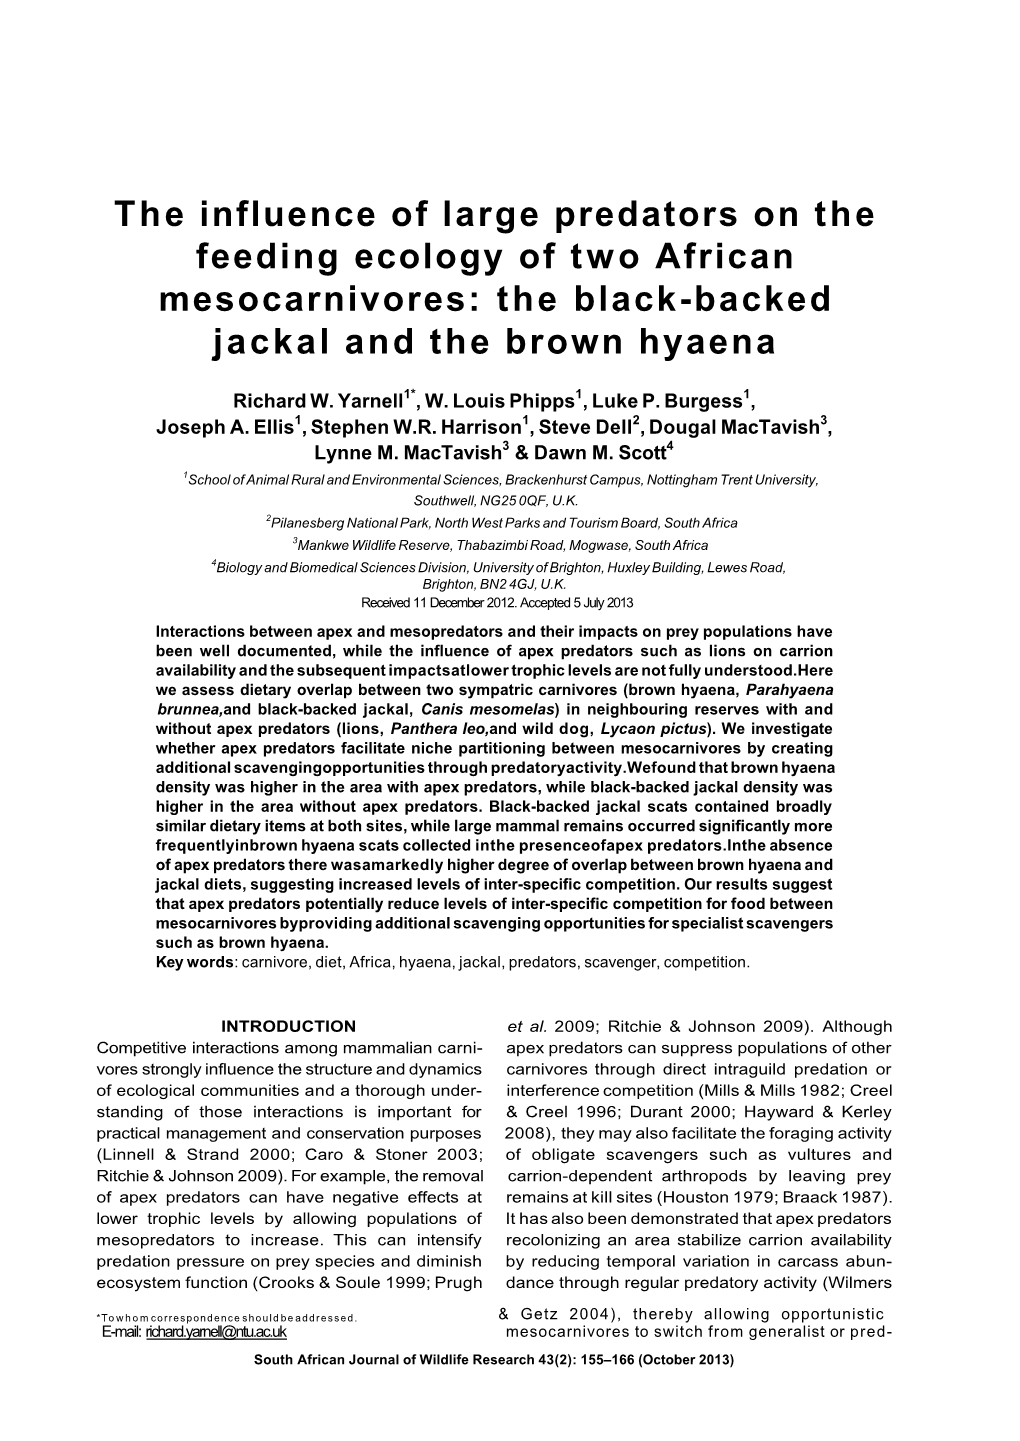 The Influence of Large Predators on the Feeding Ecology of Two African Mesocarnivores: the Black-Backed Jackal and the Brown Hyaena